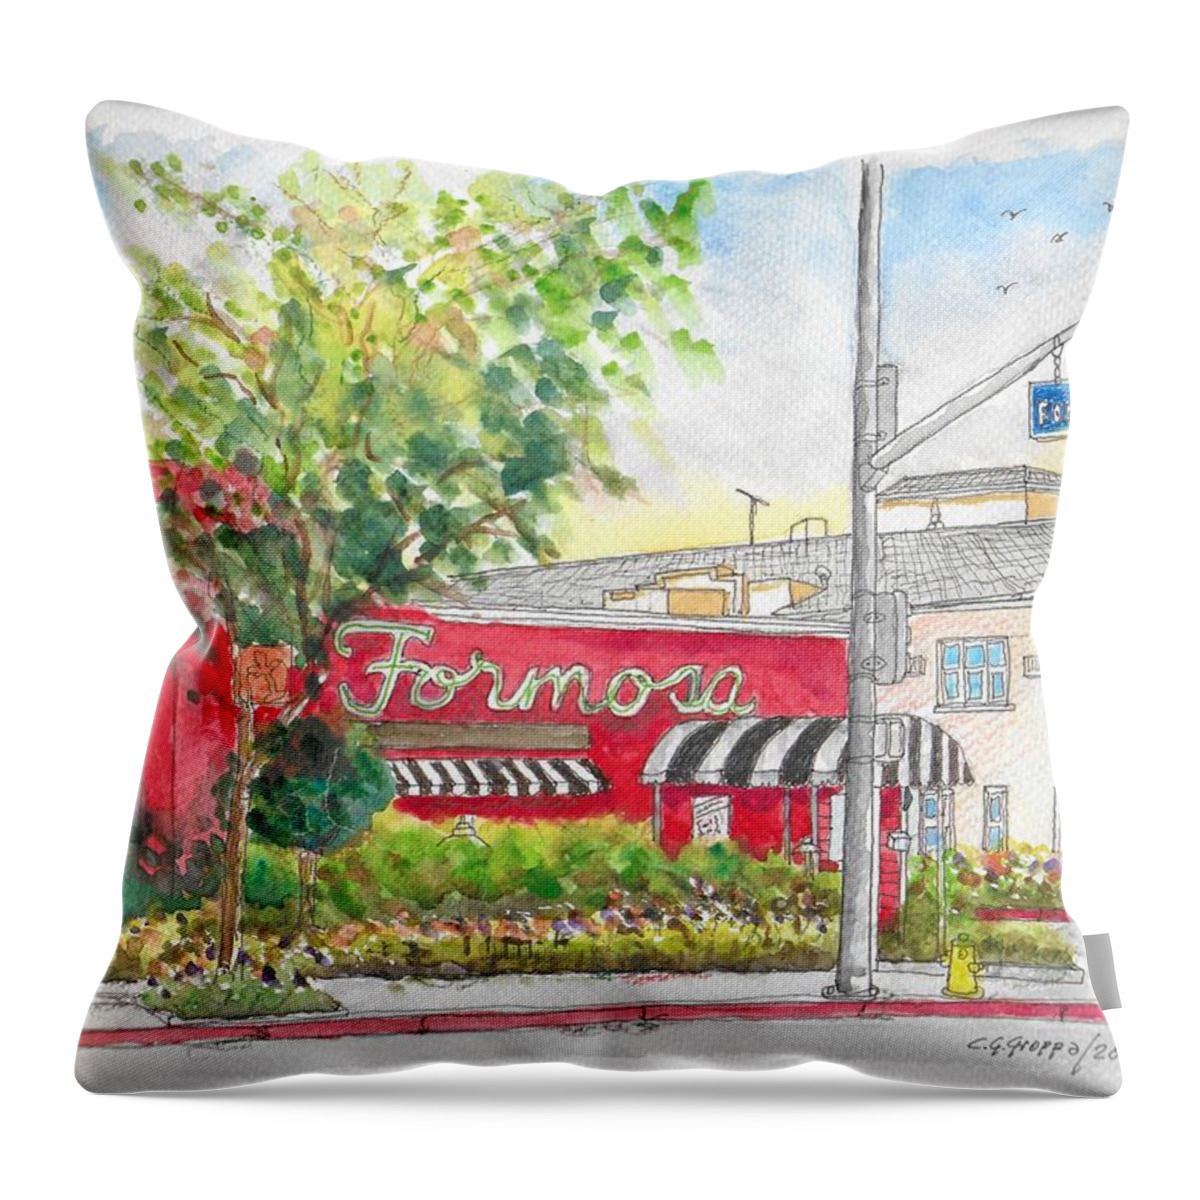 Formosa Cafe Throw Pillow featuring the painting Formosa Cafe in Santa Monica Blvd., Hollywood, California by Carlos G Groppa